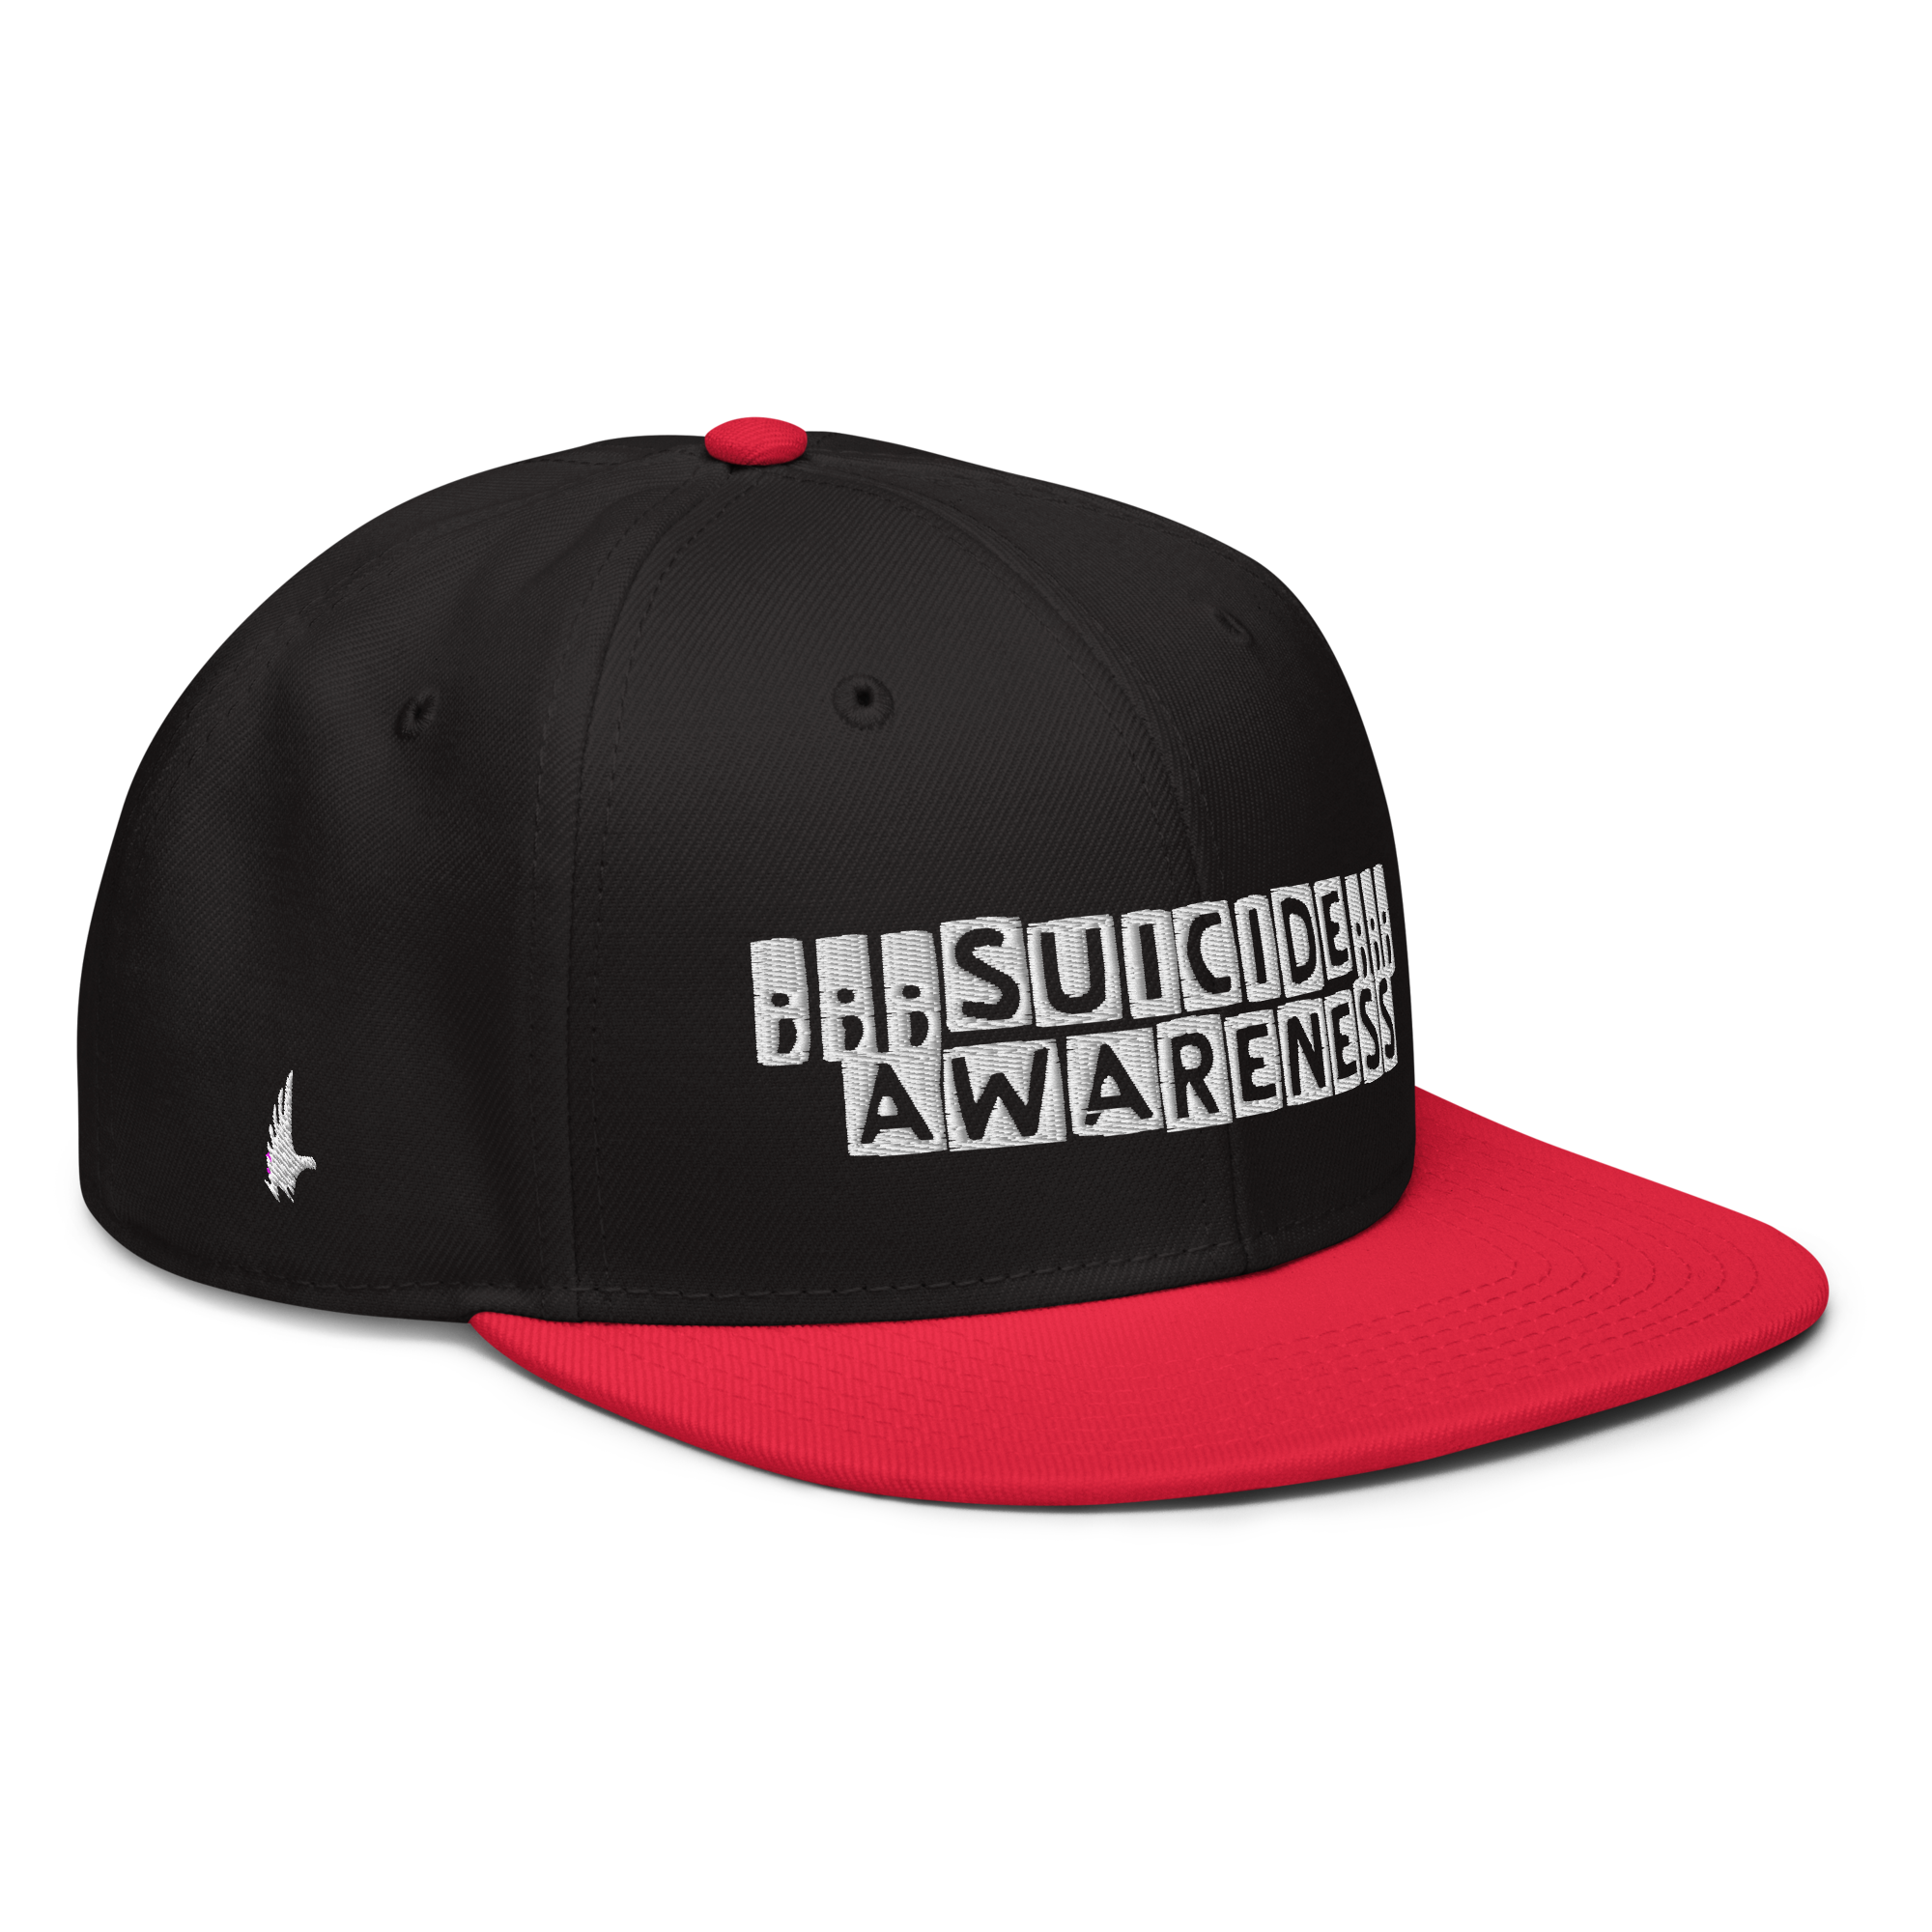 Suicide Awareness Snapback Hat - Black / White / Red OS - Loyalty Vibes